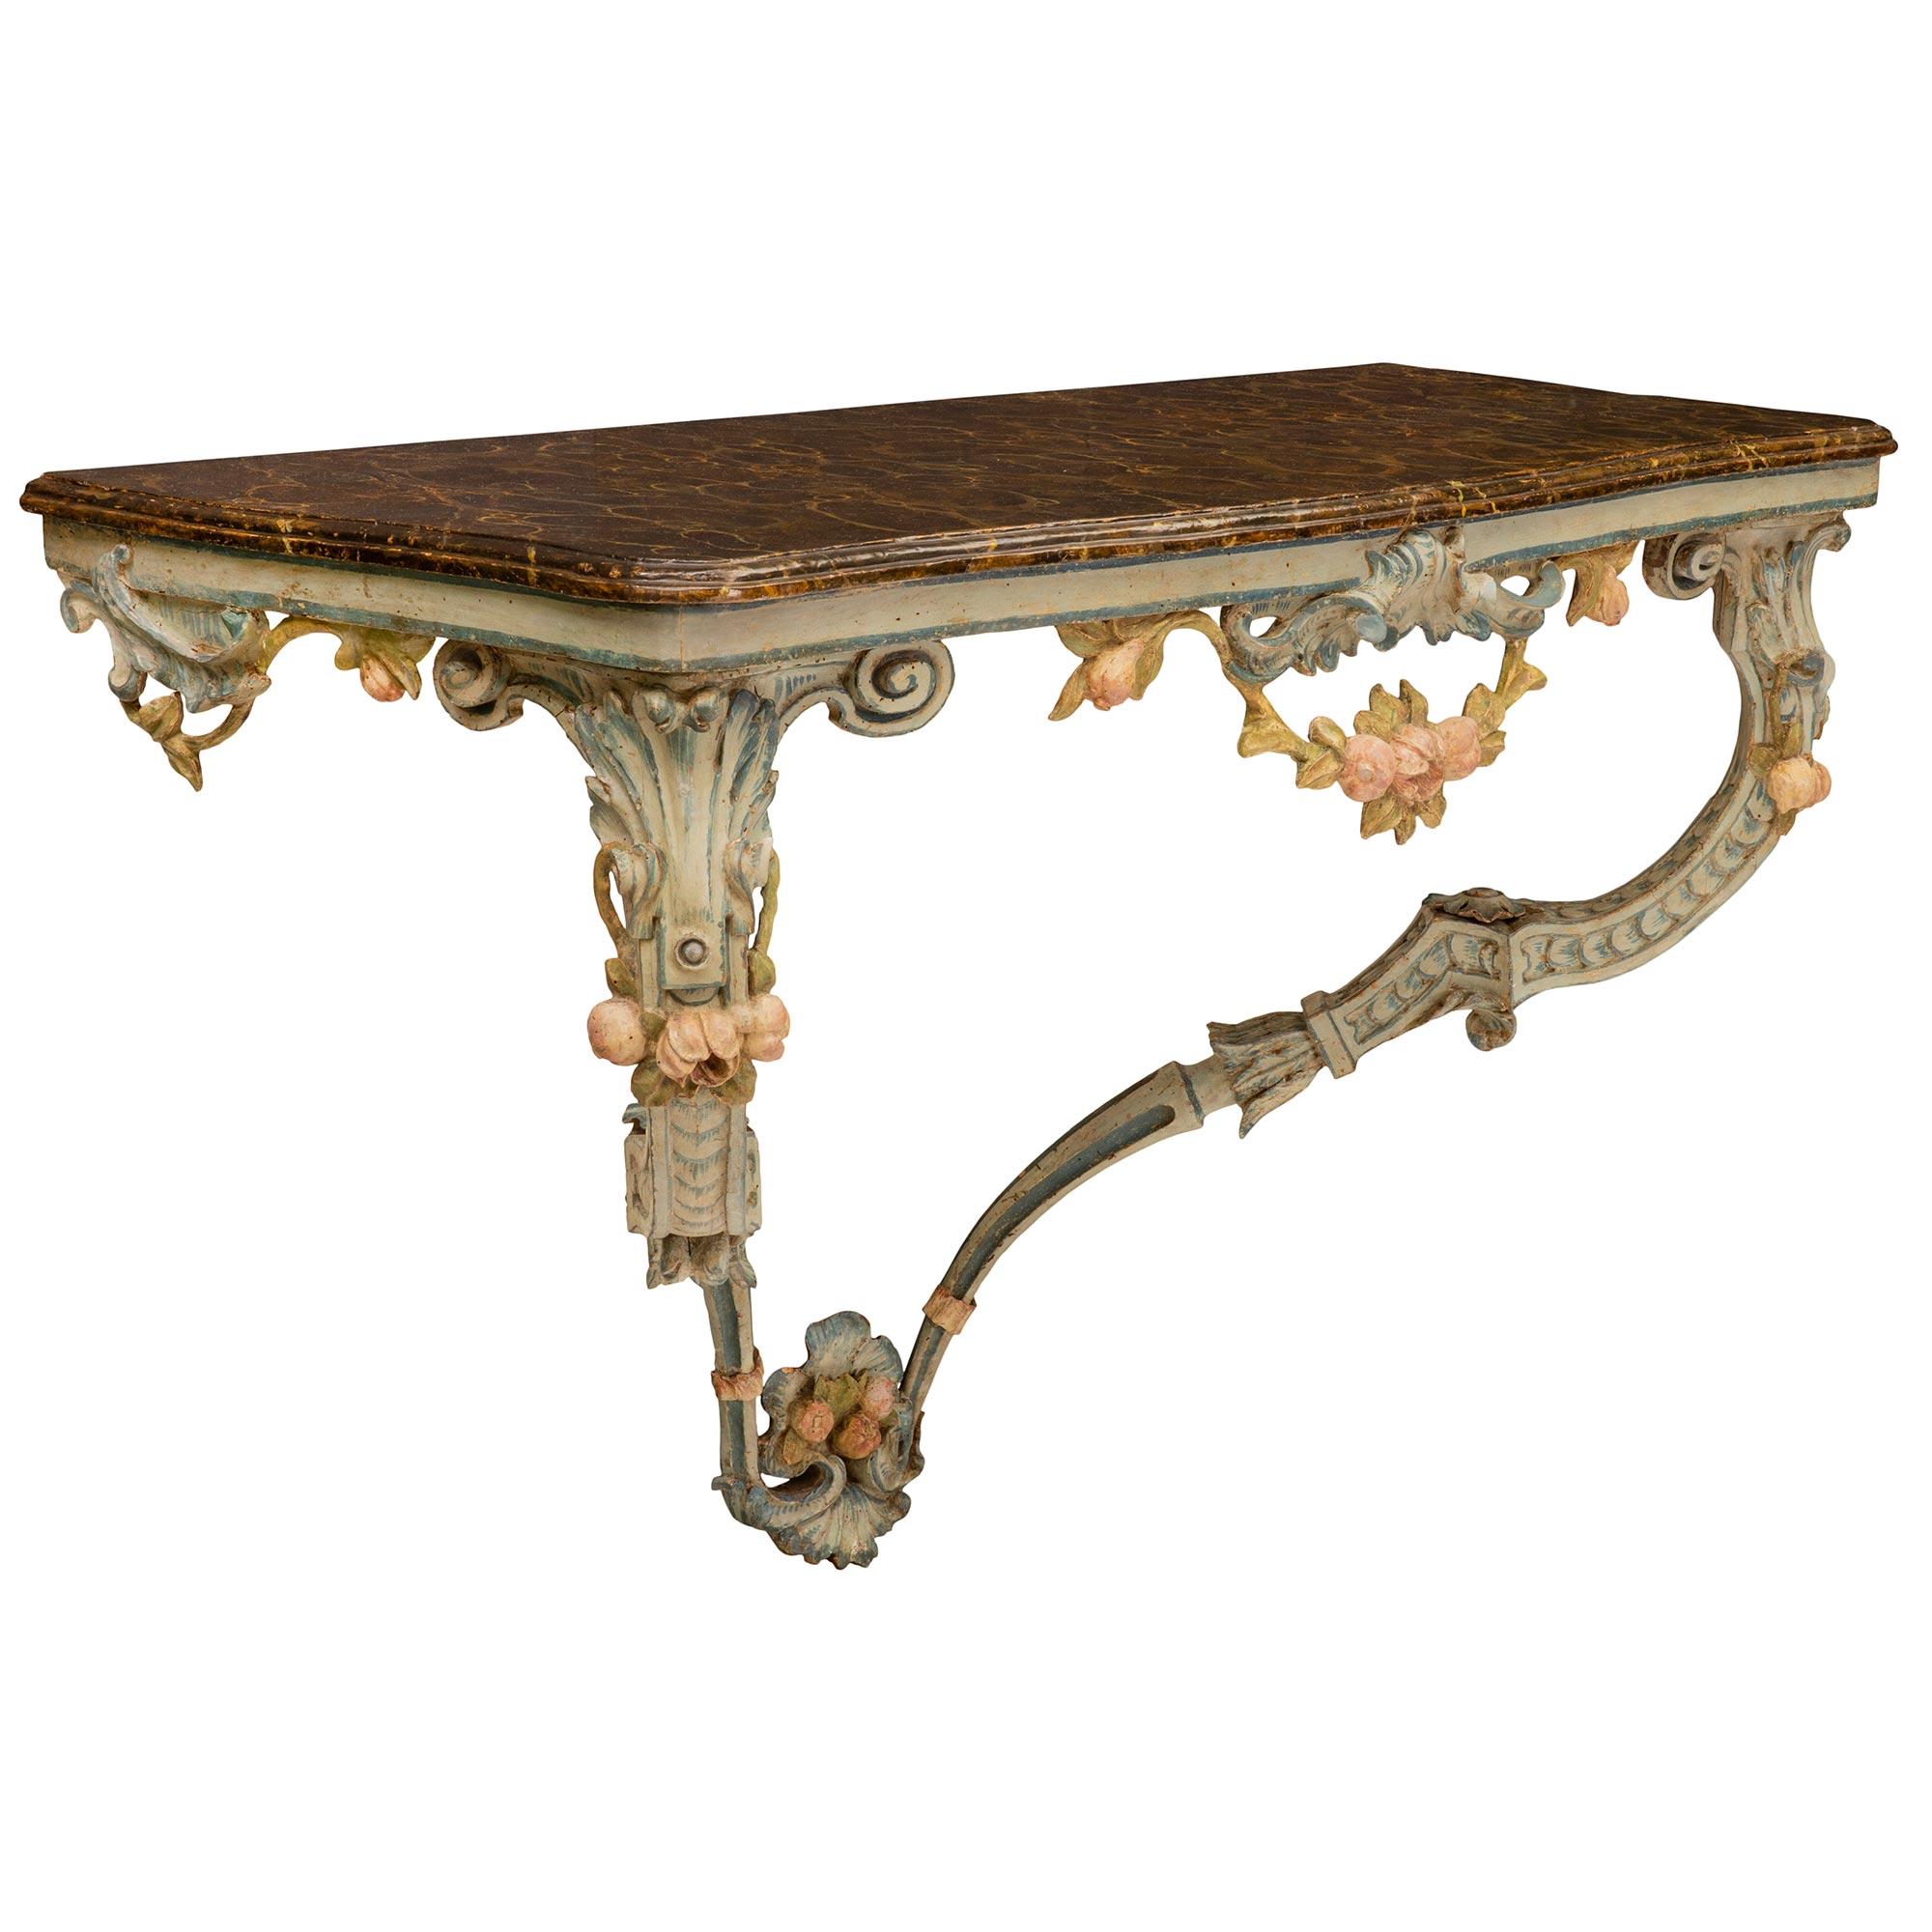  Italian 18th Century Louis XV Period Patinated Wood Wall Mounted Console In Good Condition For Sale In West Palm Beach, FL